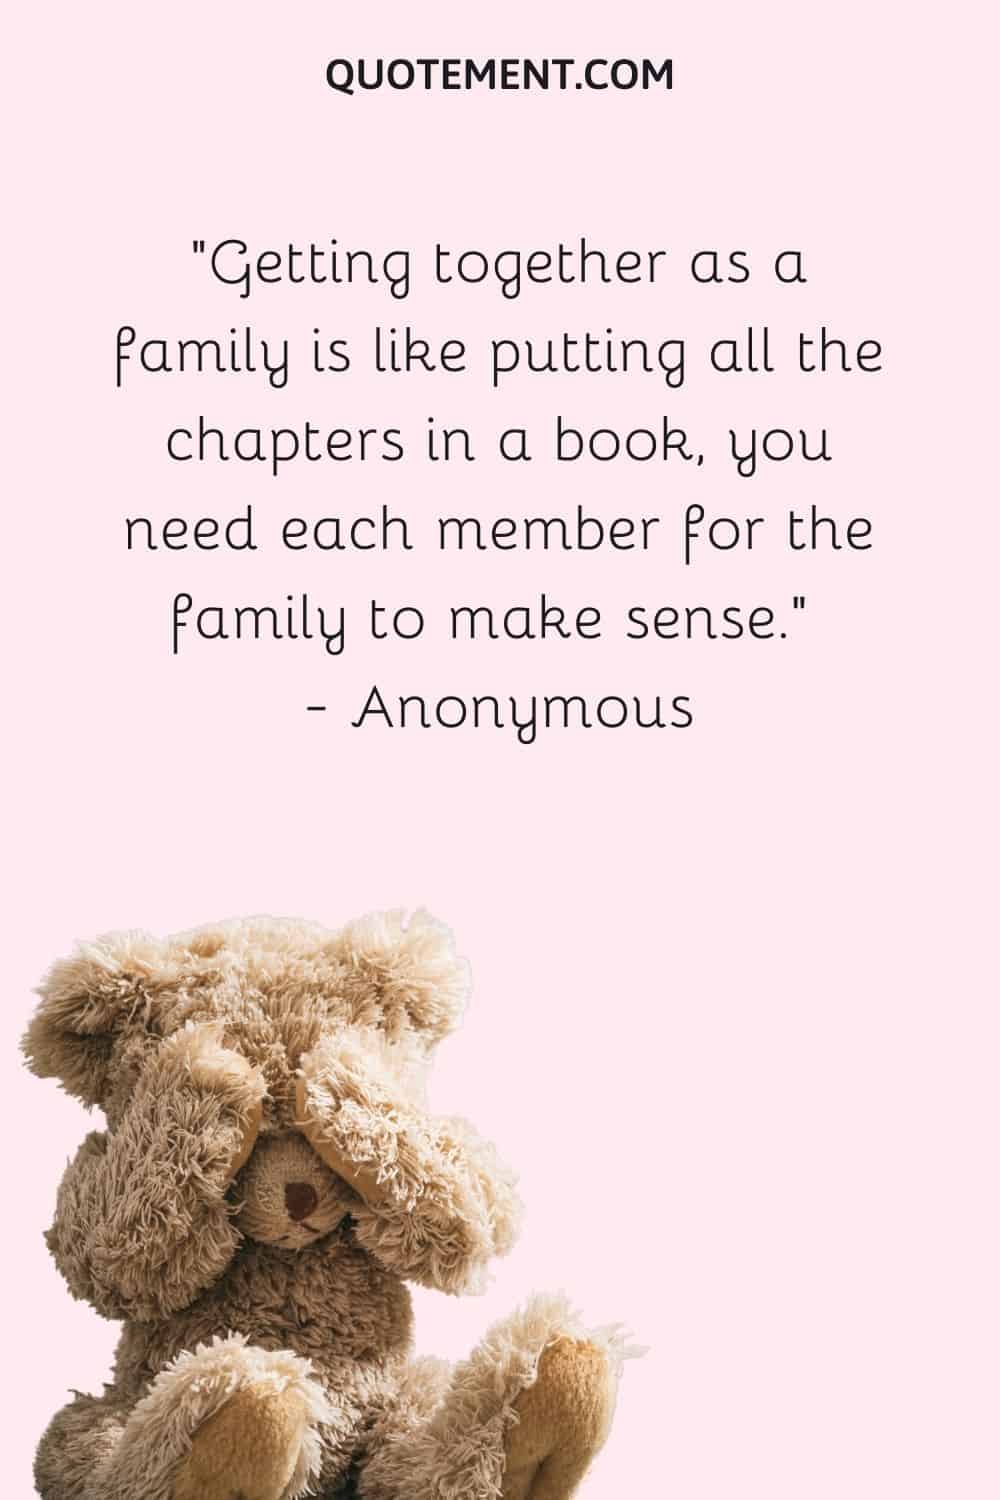 Getting together as a family is like putting all the chapters in a book, you need each member for the family to make sense. — Anonymous